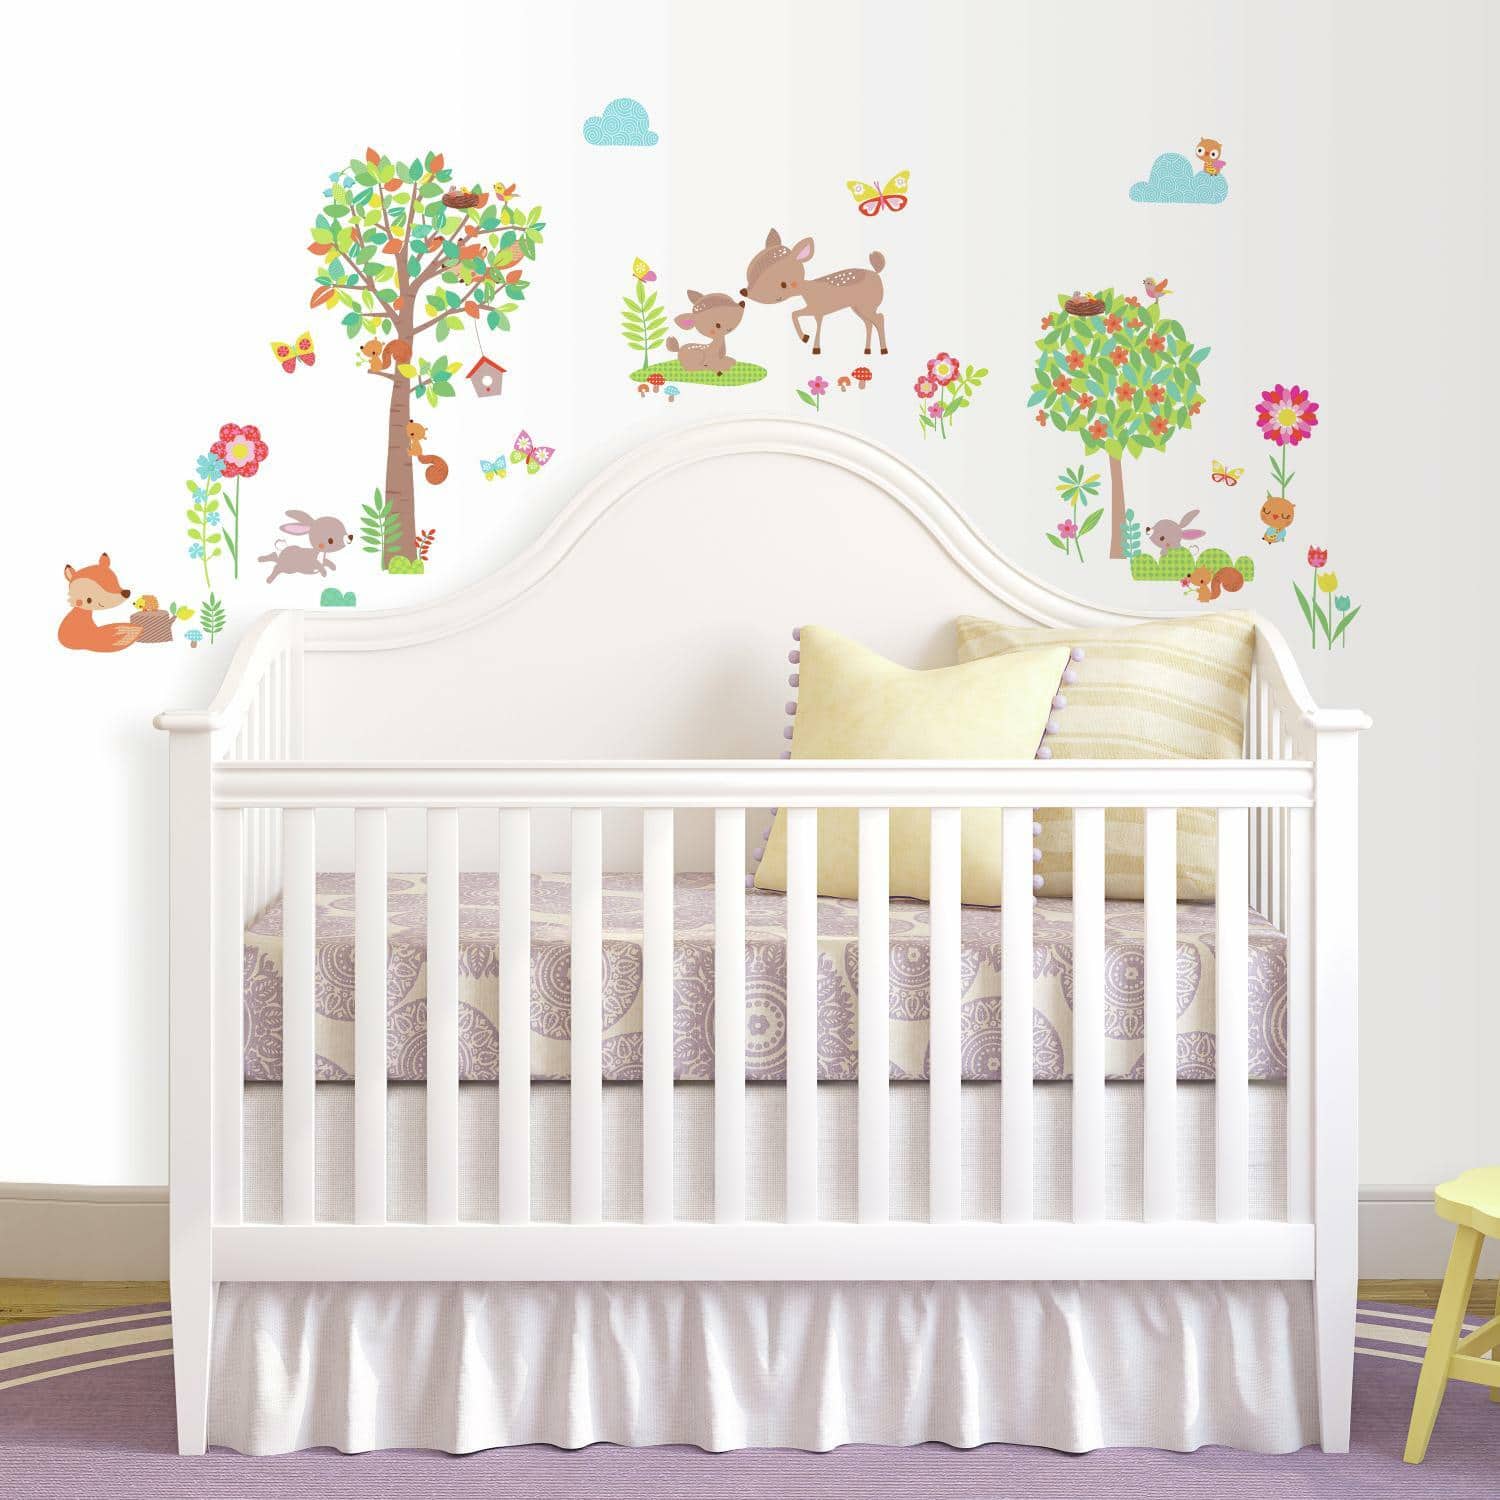 RoomMates Woodland Creatures Peel And Stick Wall Decals